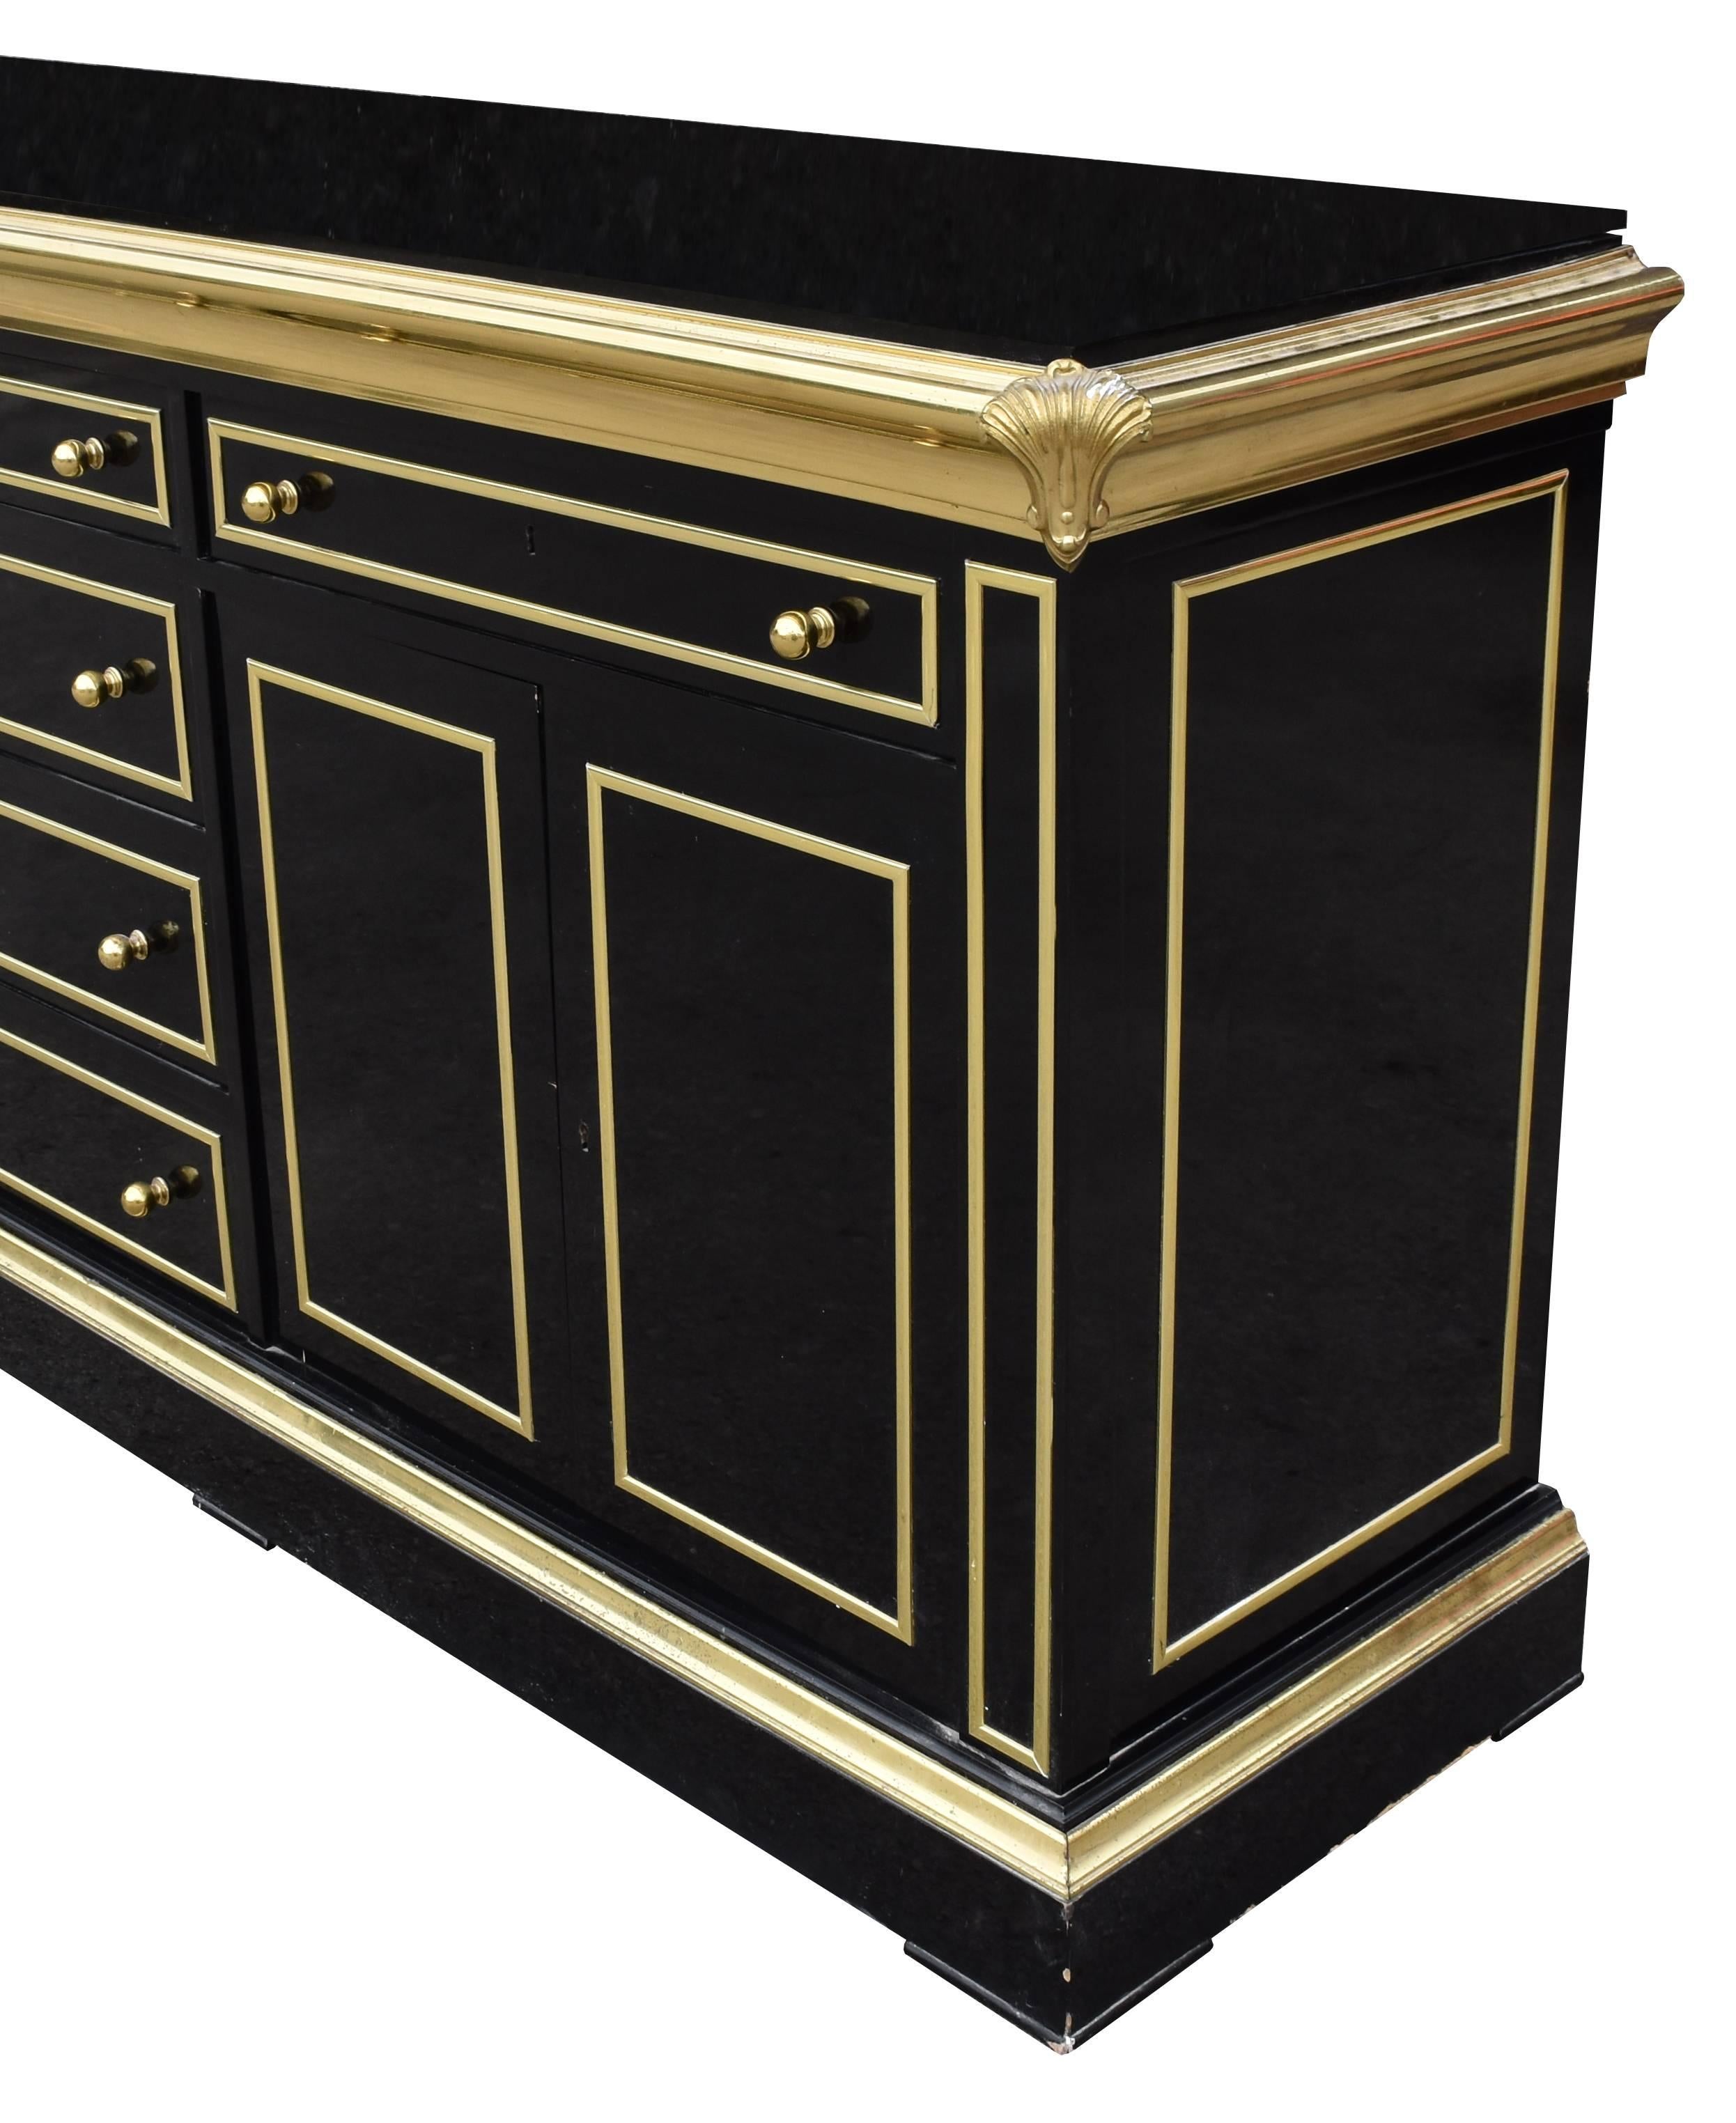 1980s lacquered black sideboard with bronze decorations.
 